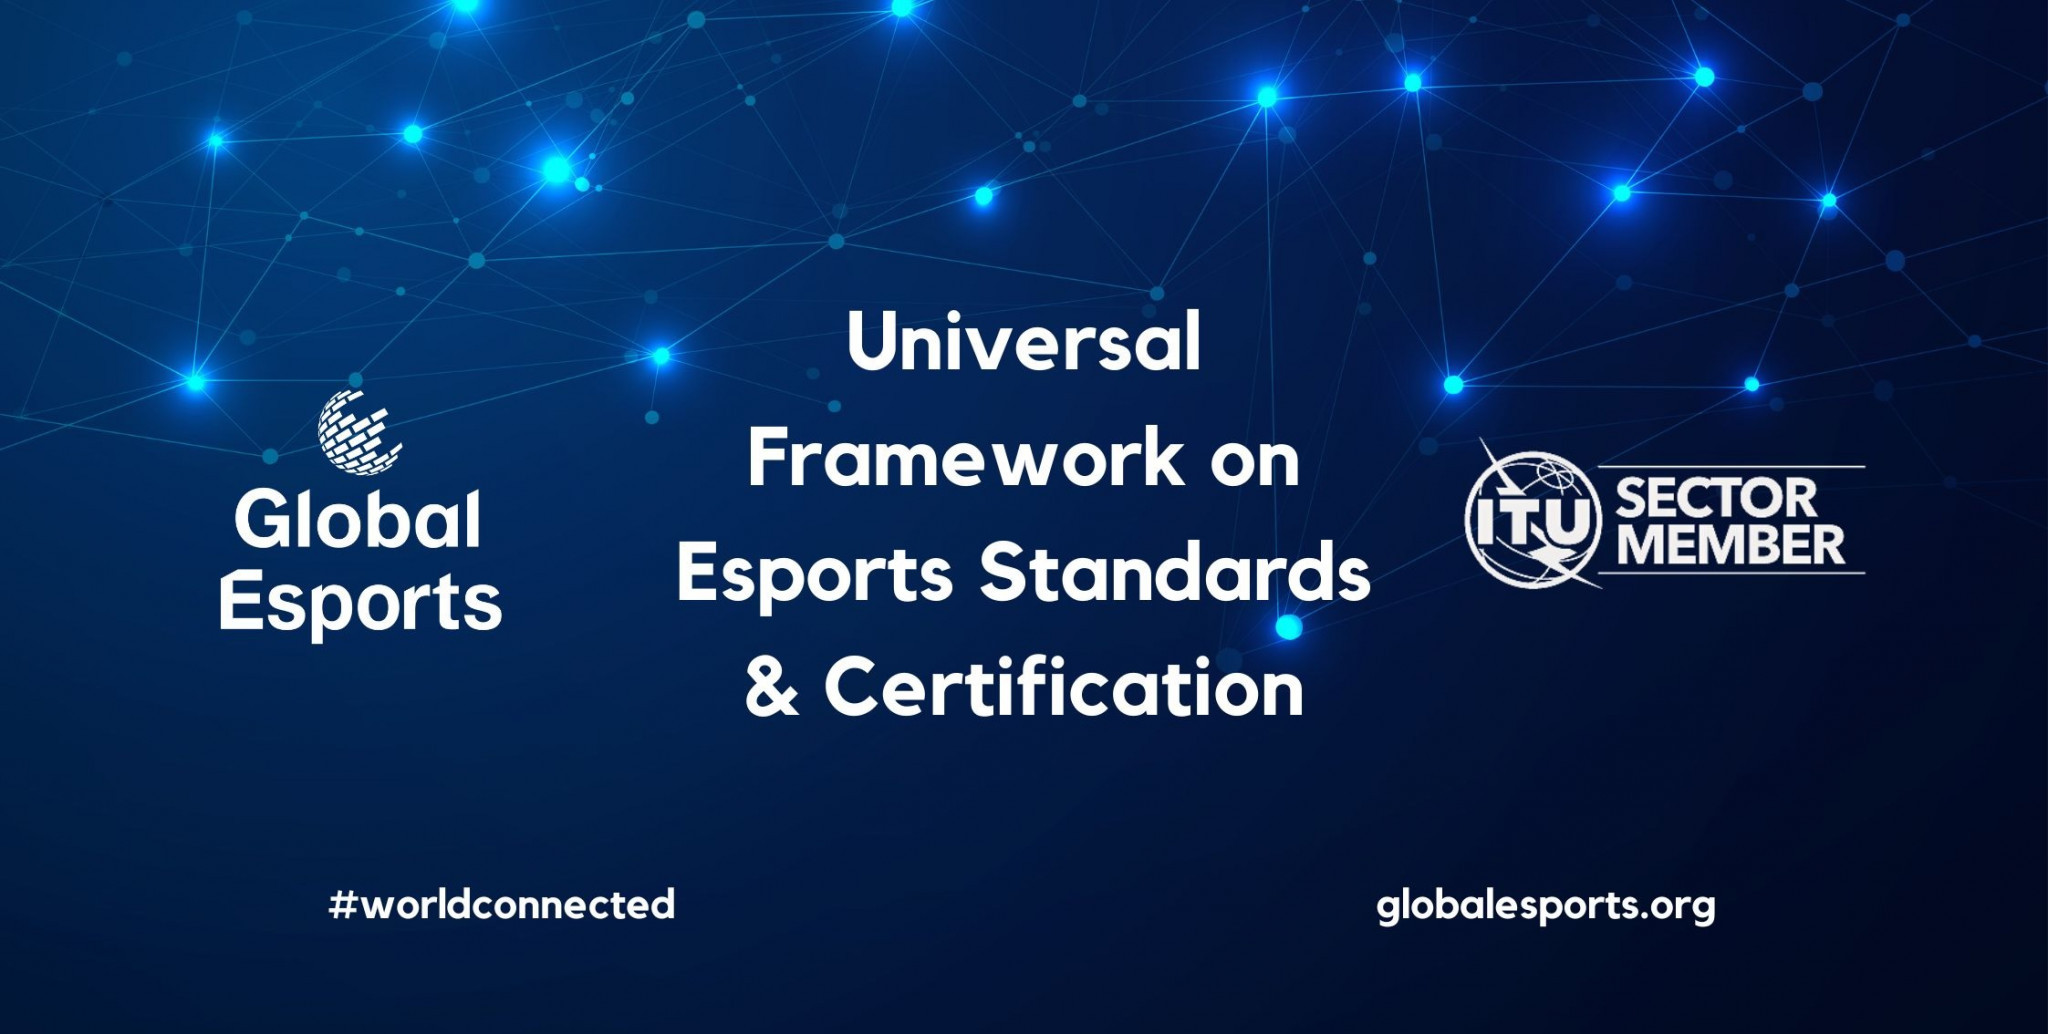 Global Esports Federation planning to develop universal framework for the sport